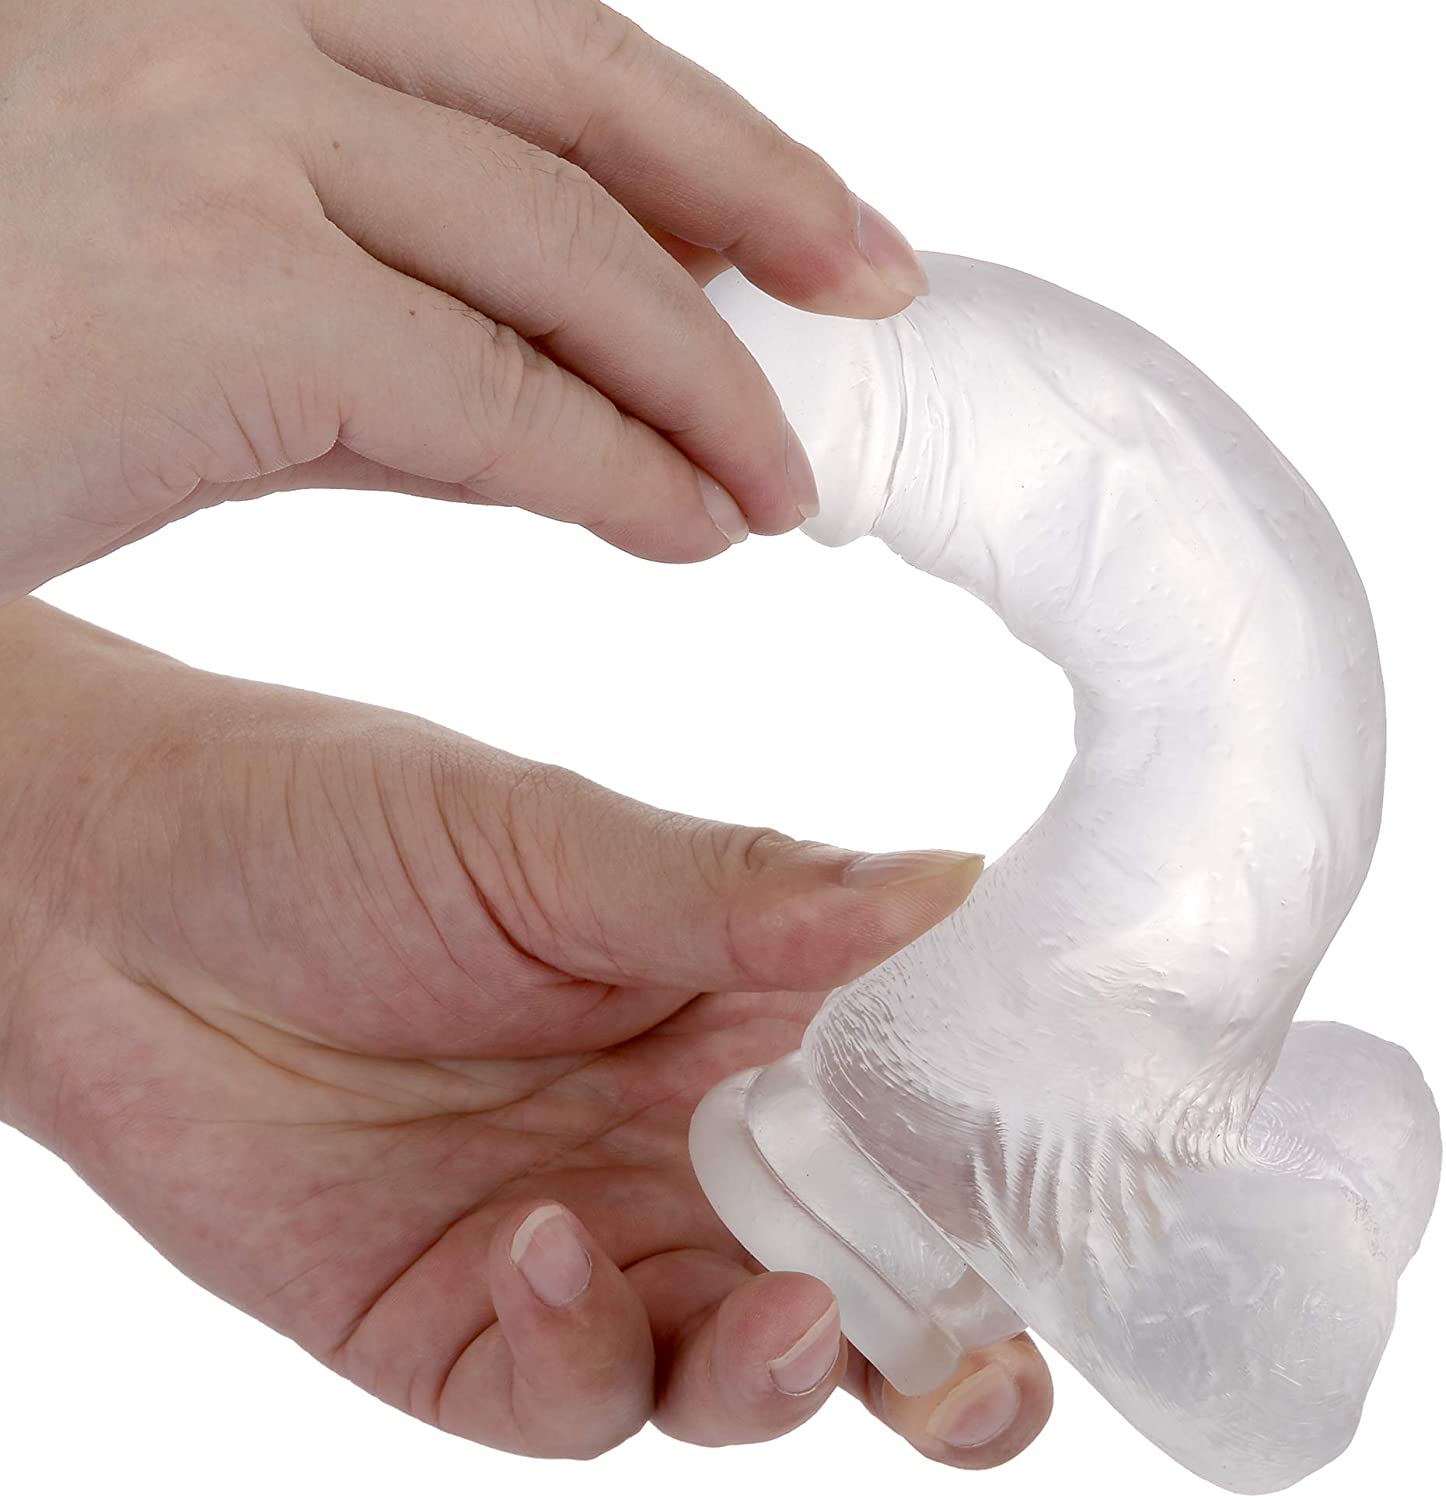 Realistic Dildos Feels Like Skin, 7.3 Inch Clear Dildo with Suction Cup for Hands-Free Play, Body-Safe Material and Adult Sex Toys for Women - Koawas